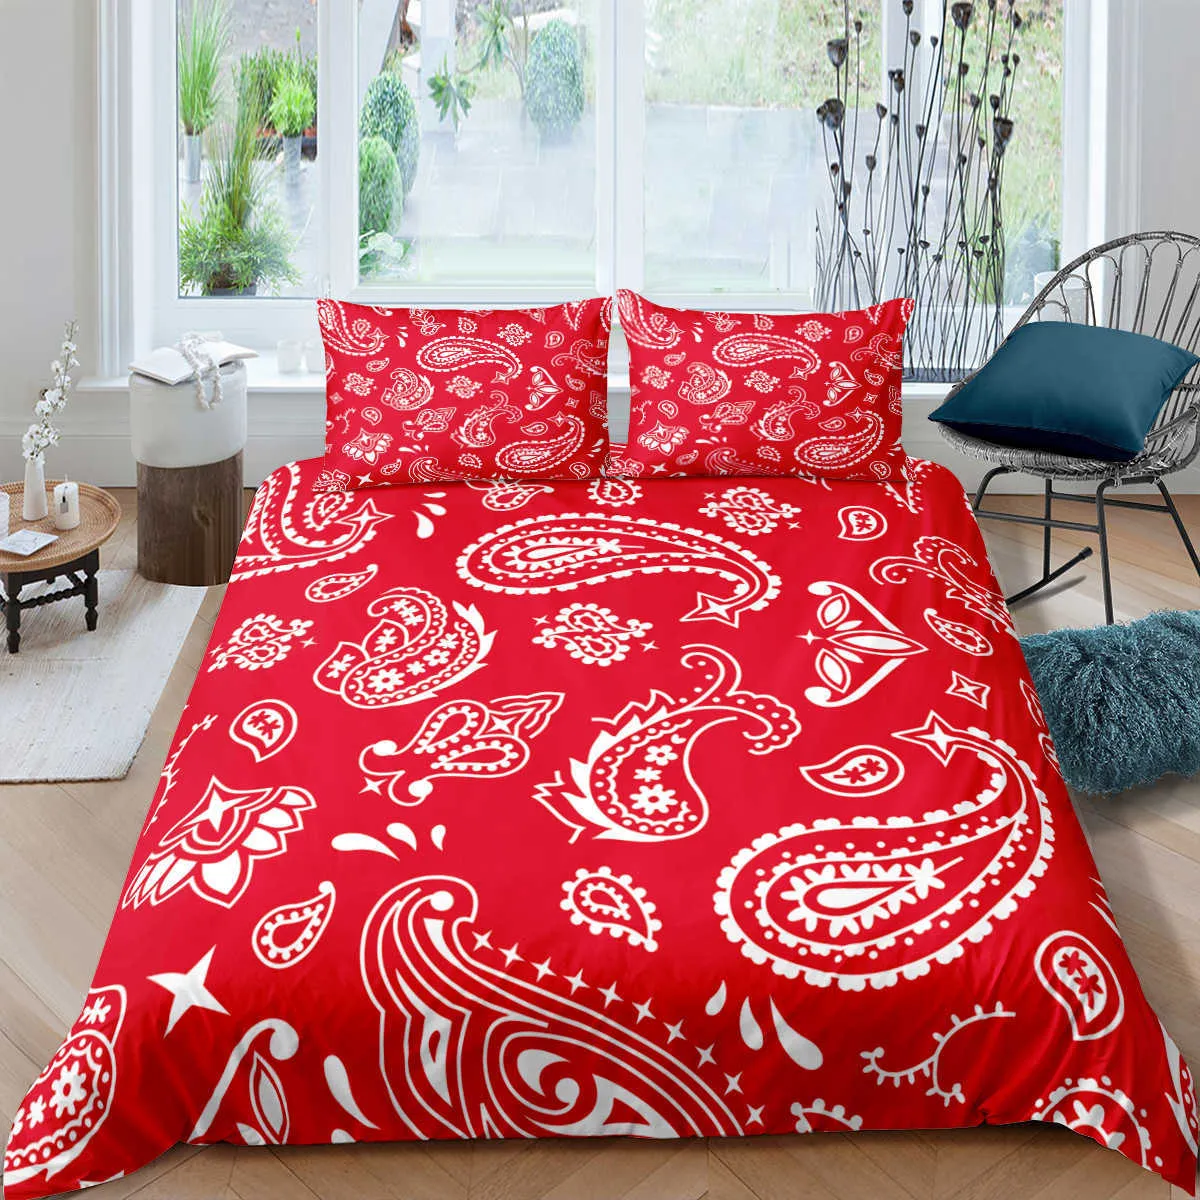 Paisley Bandana Printed Duvet Cover Bedding Sets With Pillow Case Luxury Bedspread Single Full Queen King Size H09135221950